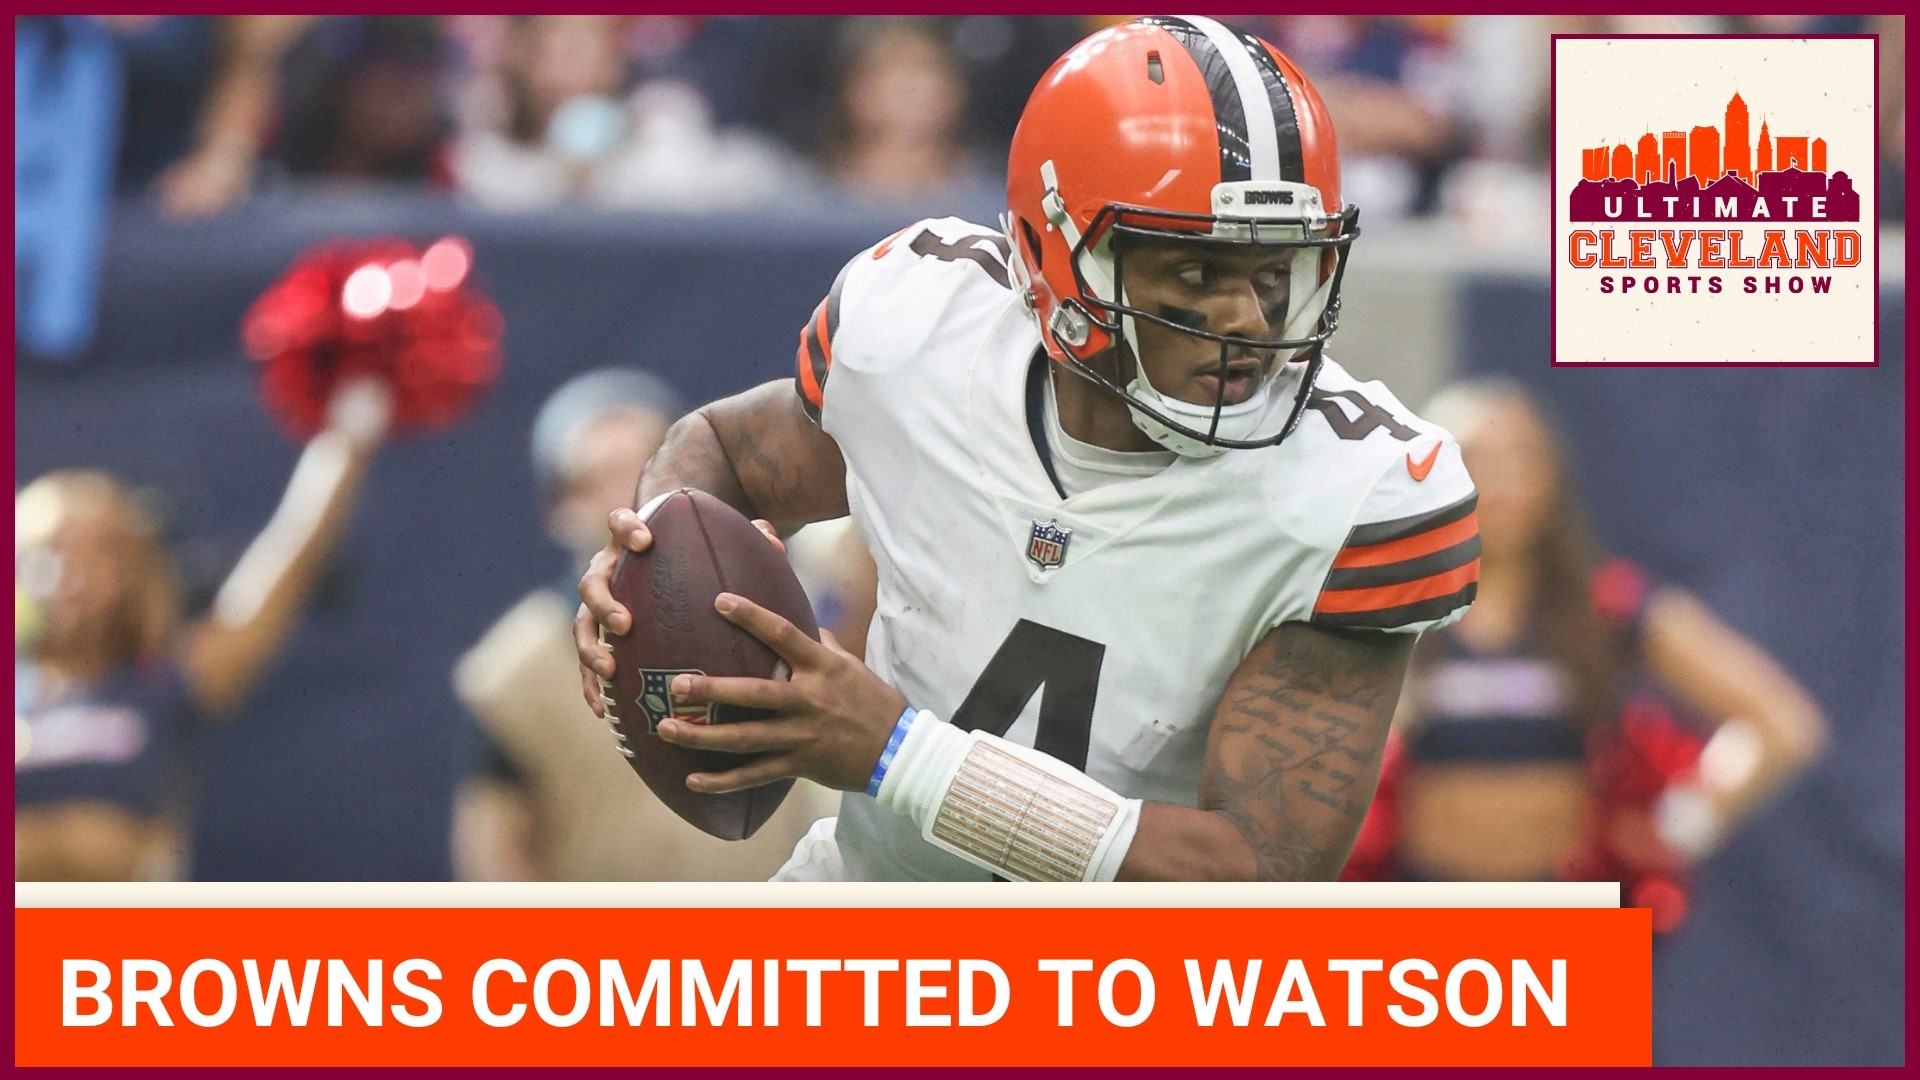 No matter how bad Watson plays for six games, the Cleveland Browns are all in on their franchise QB